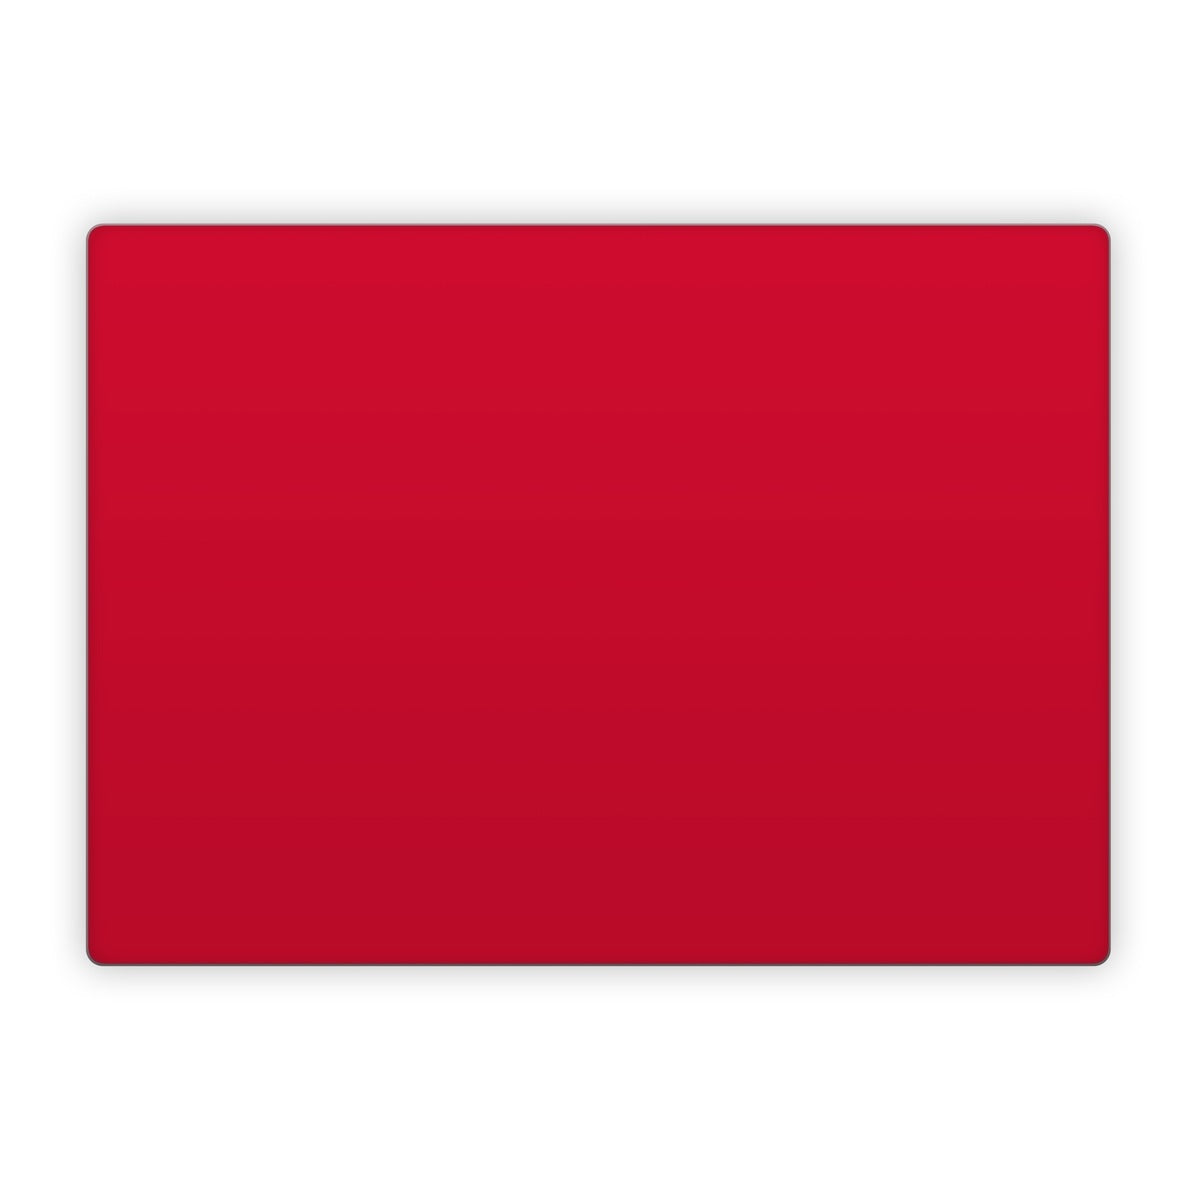 Solid State Red - Microsoft Surface Laptop Skin